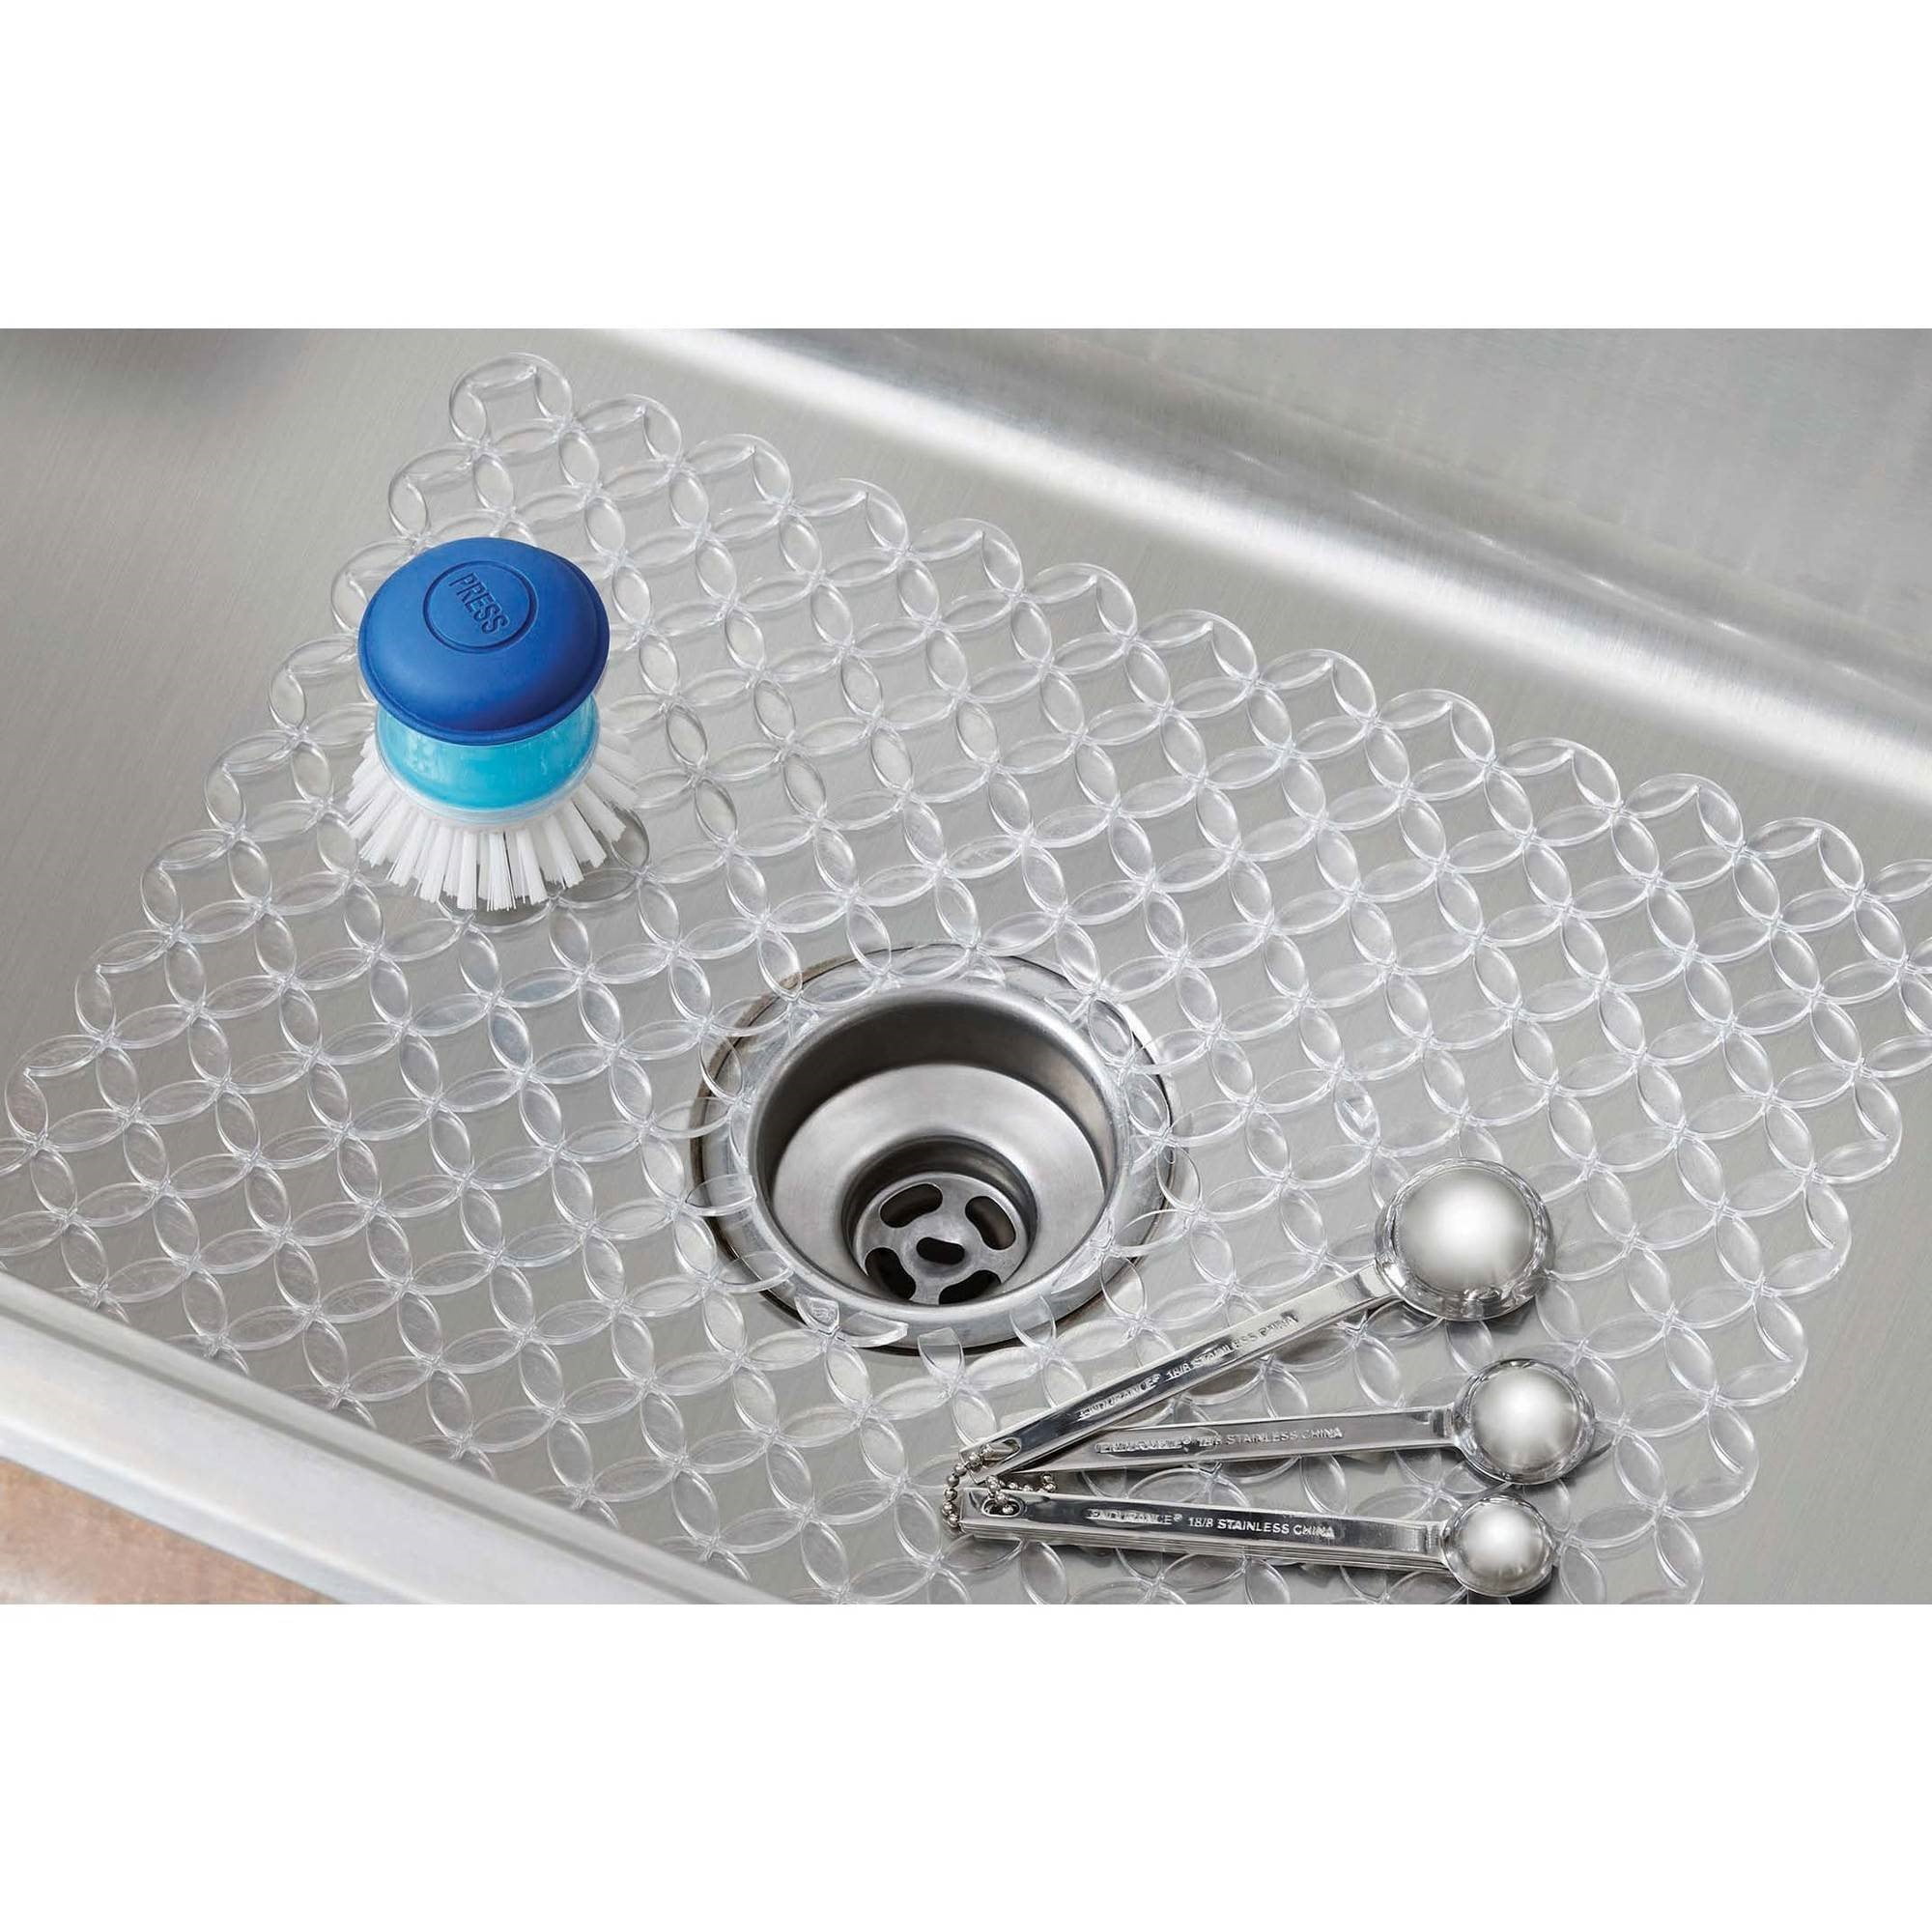 Mainstays Kitchen Sink Mat And Sink Protector